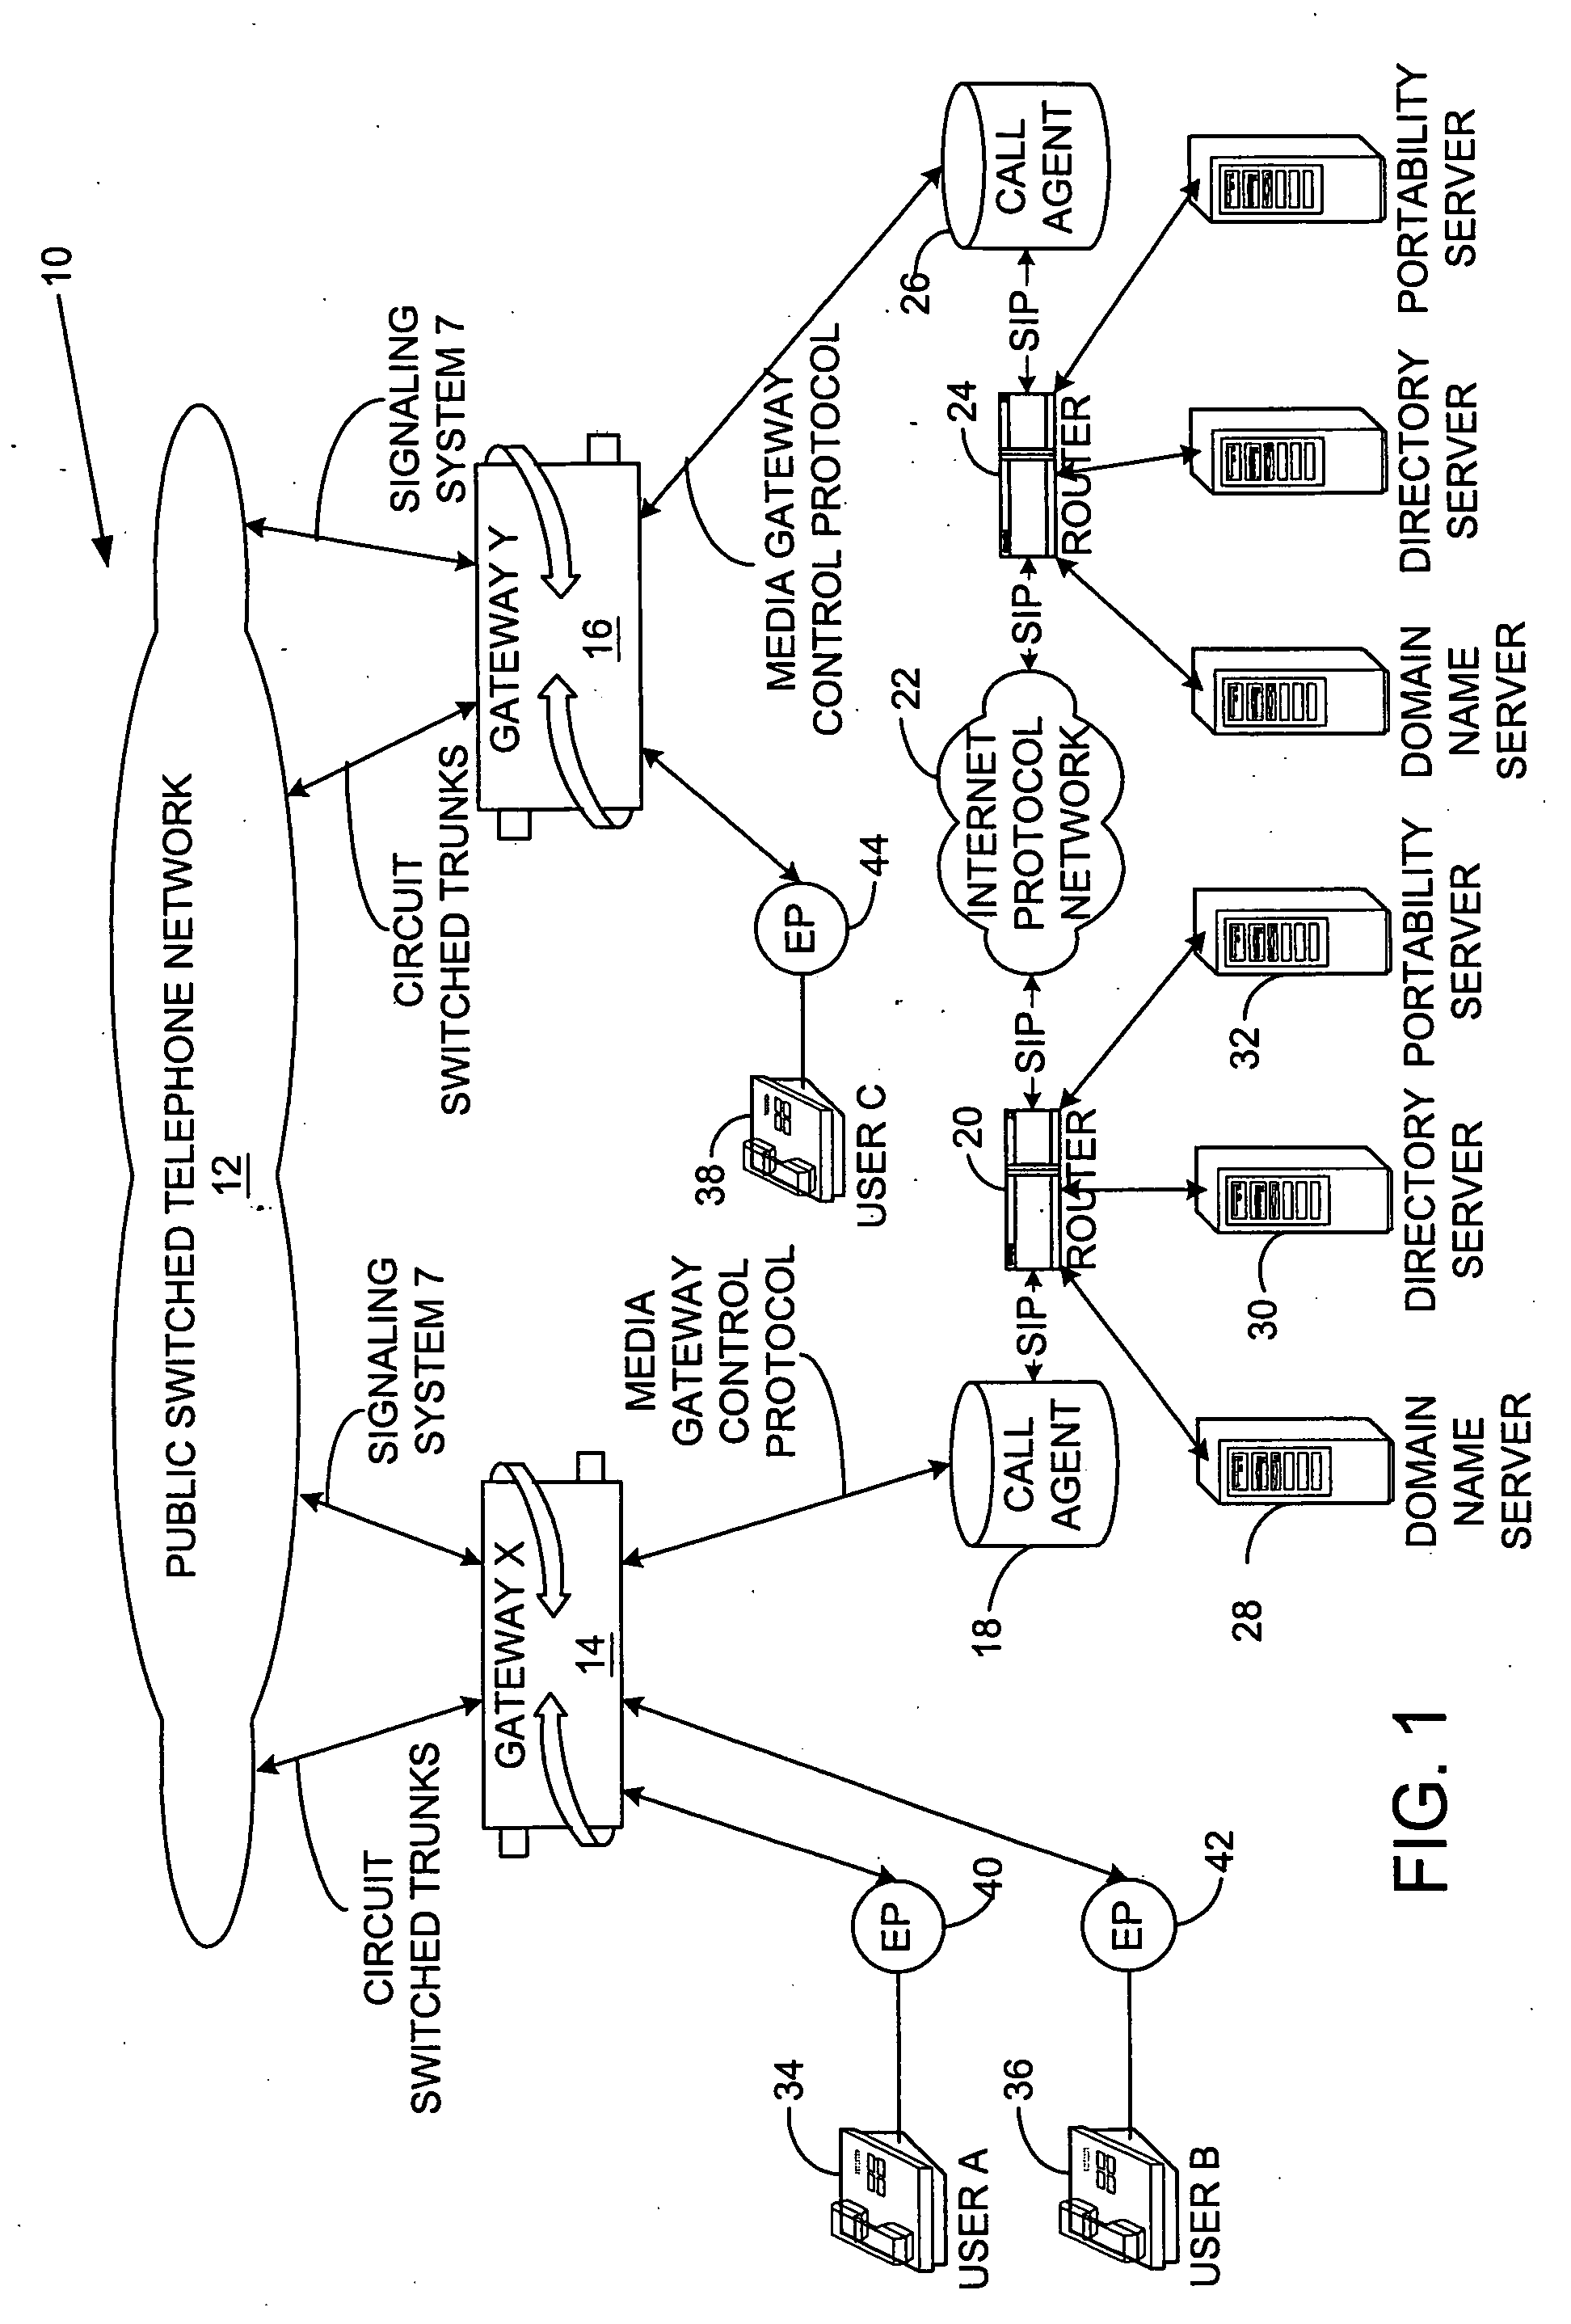 System and method for providing call management services in a virtual private network using voice or video over Internet protocol